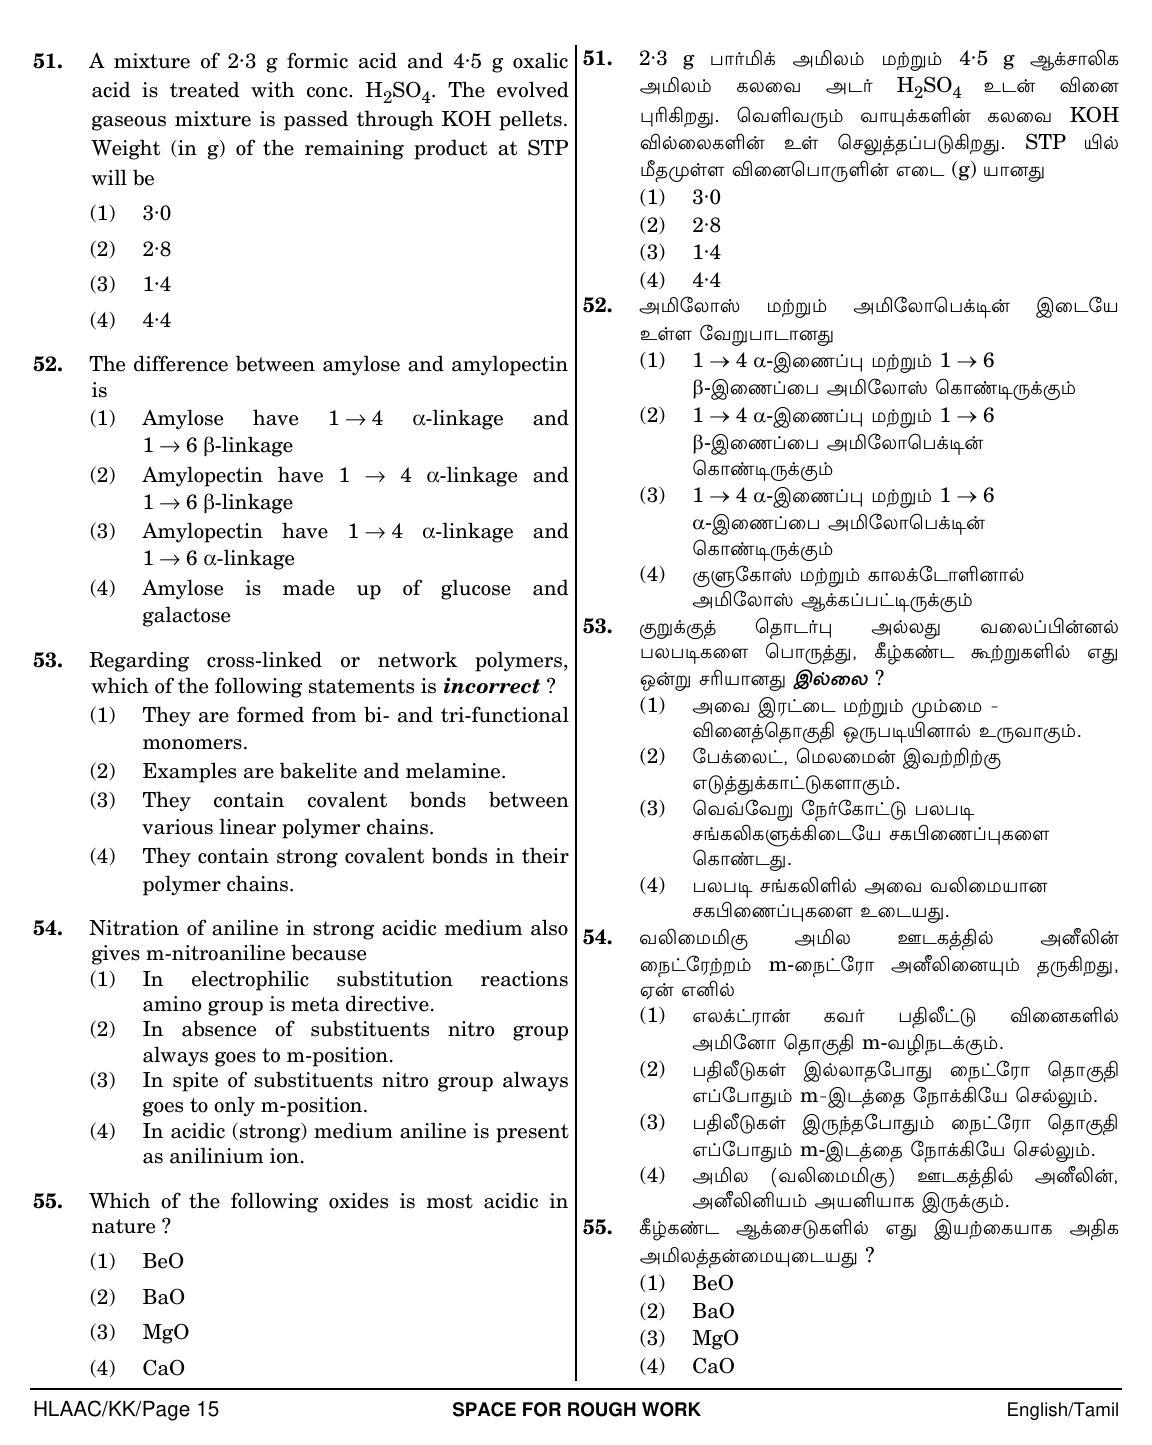 NEET Tamil KK 2018 Question Paper - Page 15